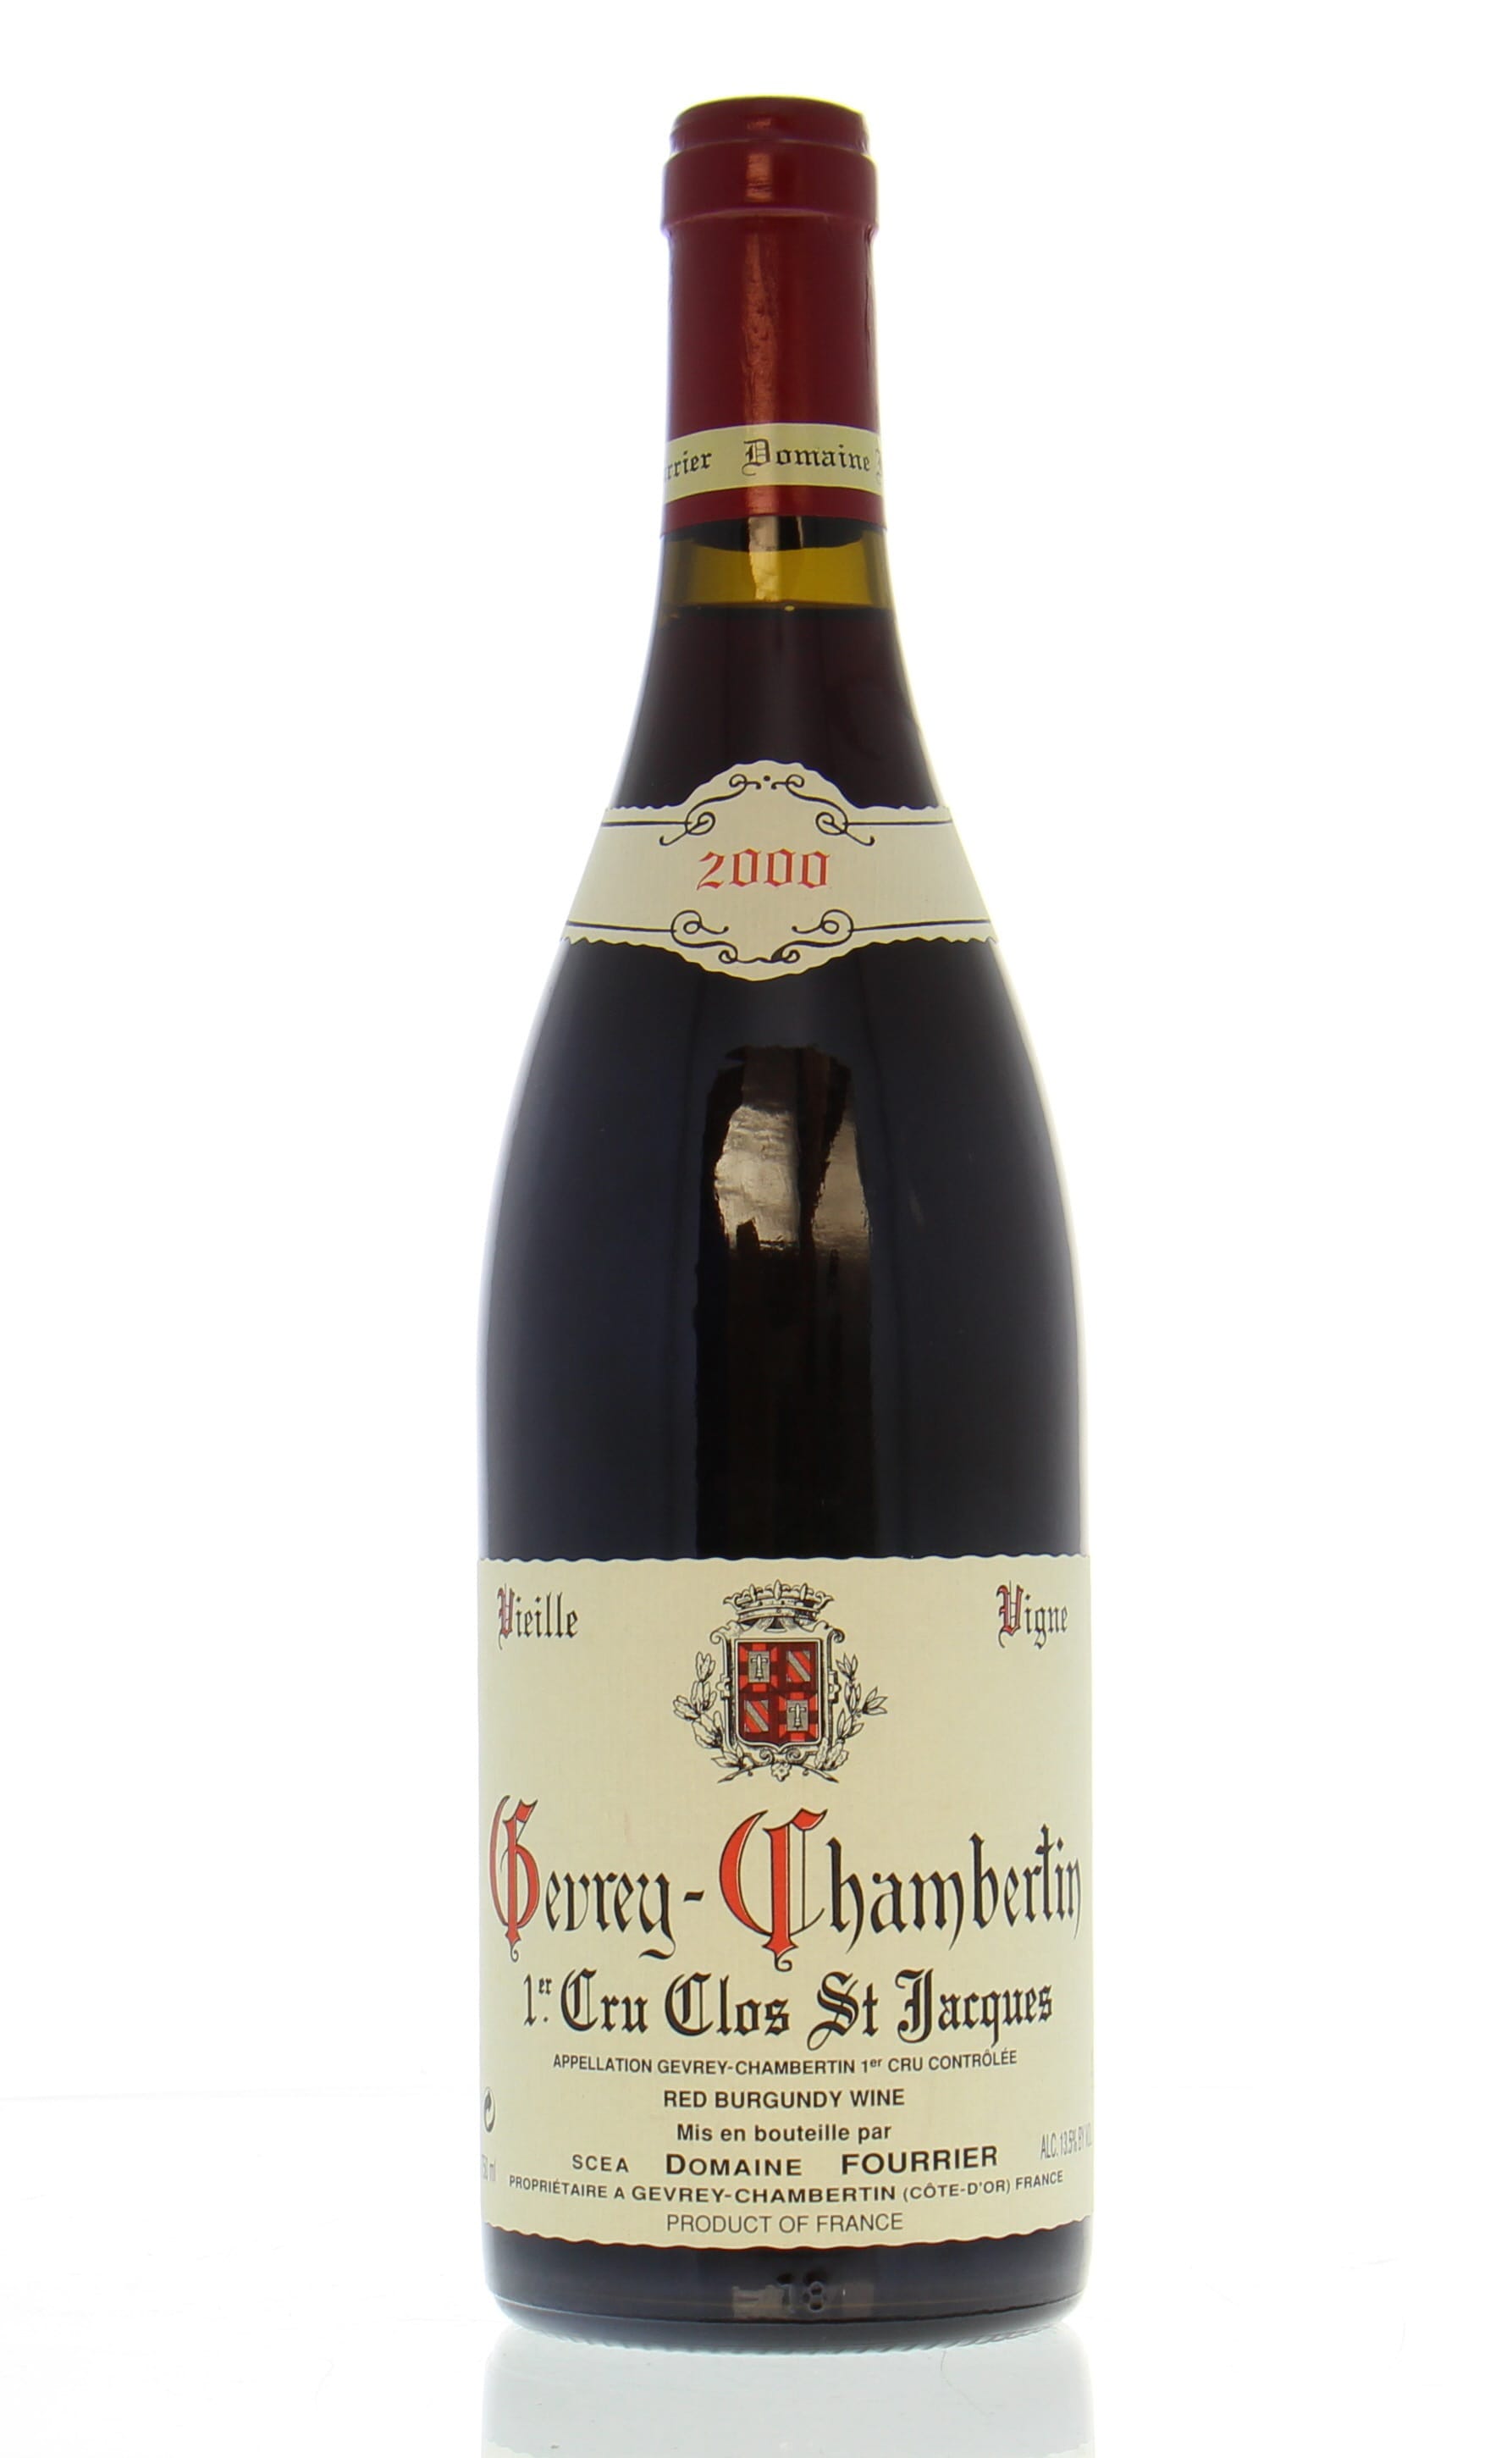 Domaine Fourrier  - Gevrey Chambertin Clos St Jacques 2000 Perfect